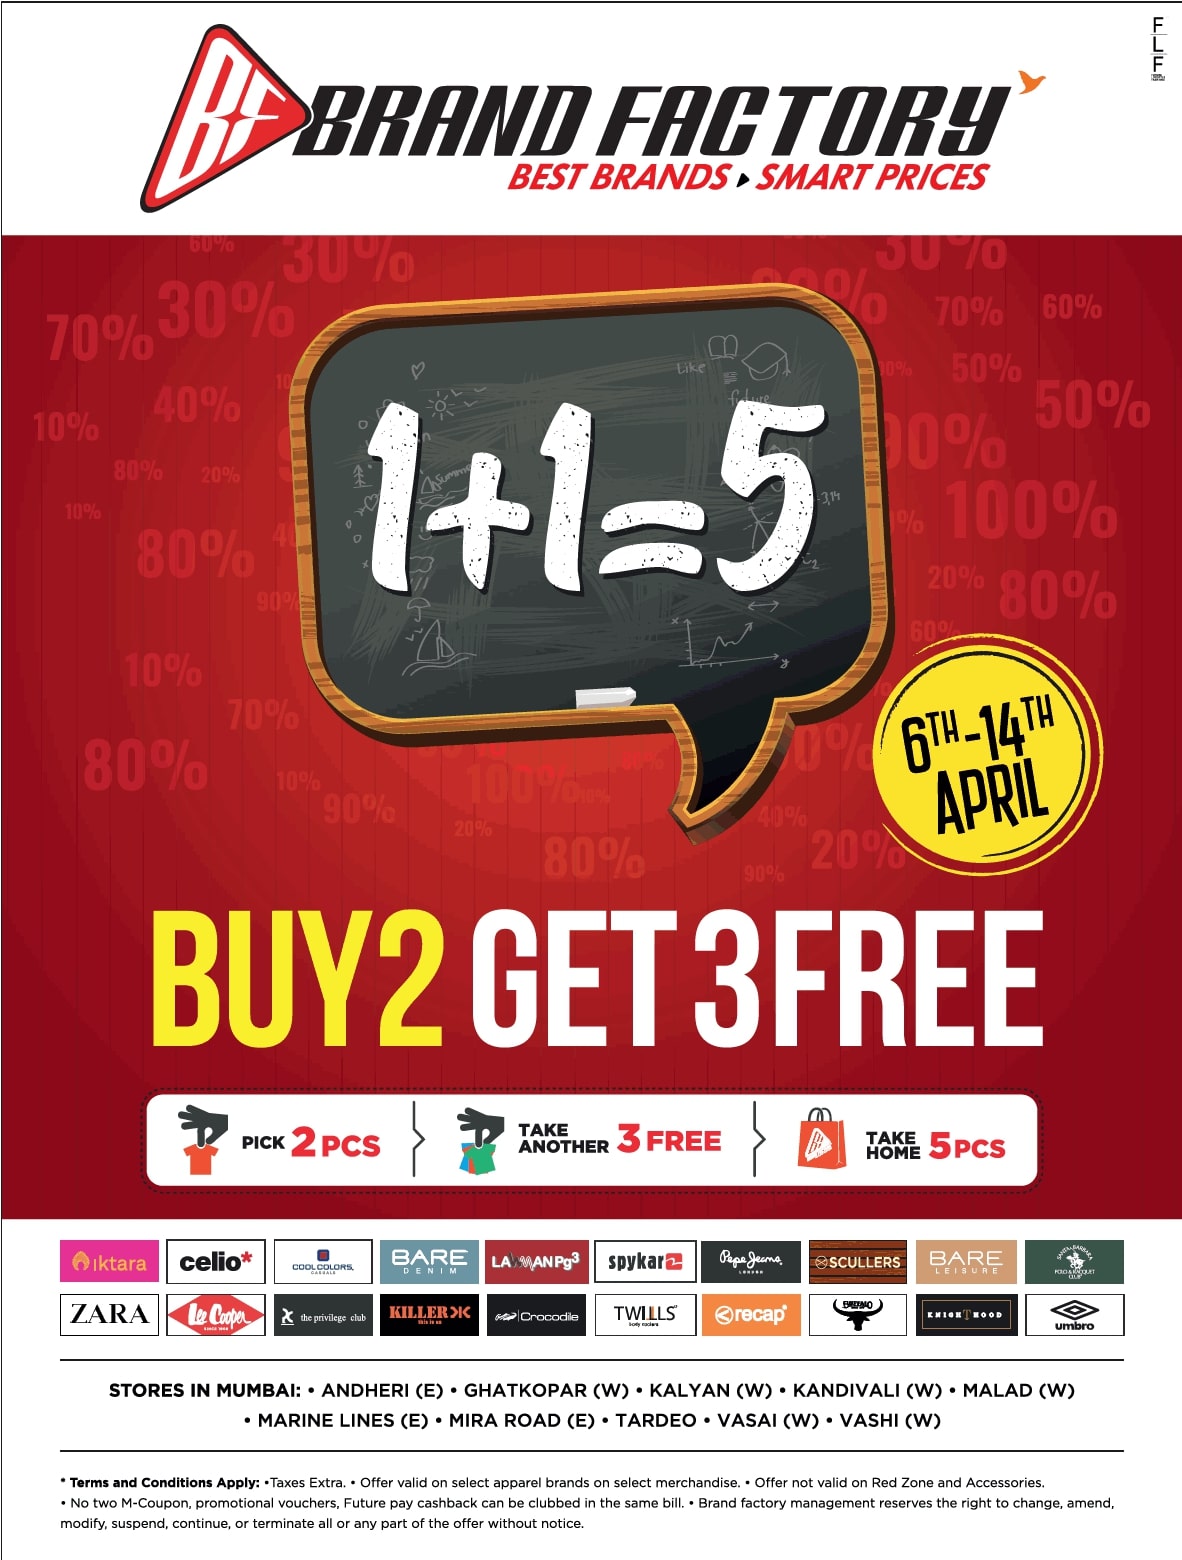 brand-factory-1-plus-1-equals-to-5-buy-2-get-3-free-ad-bombay-times-06-04-2021